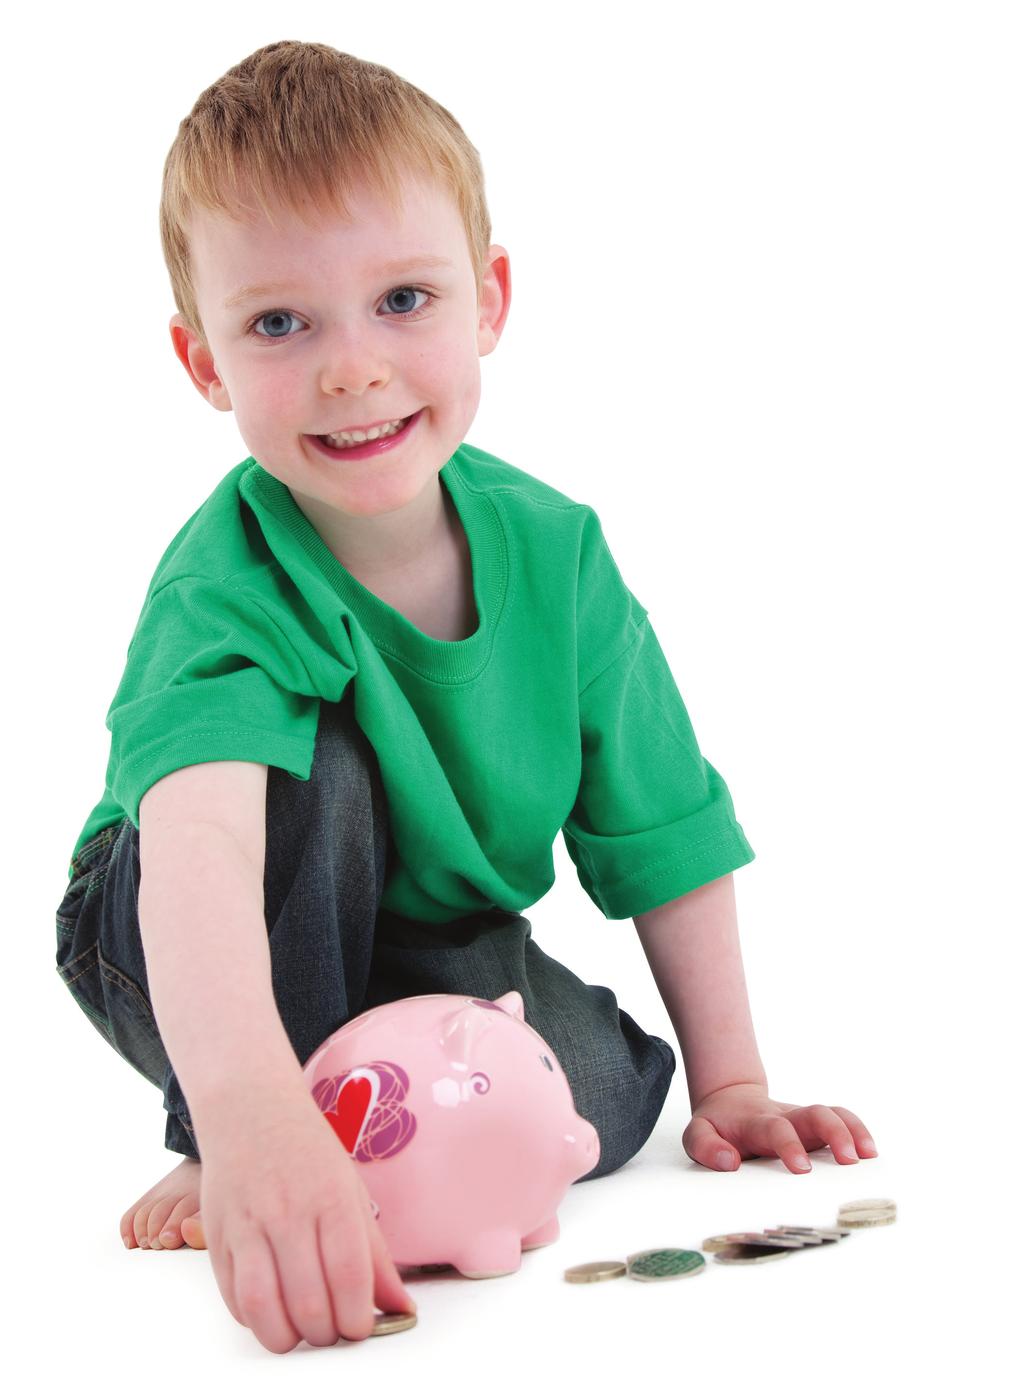 Switching to KiddiVouchers The easy way to revive your Childcare